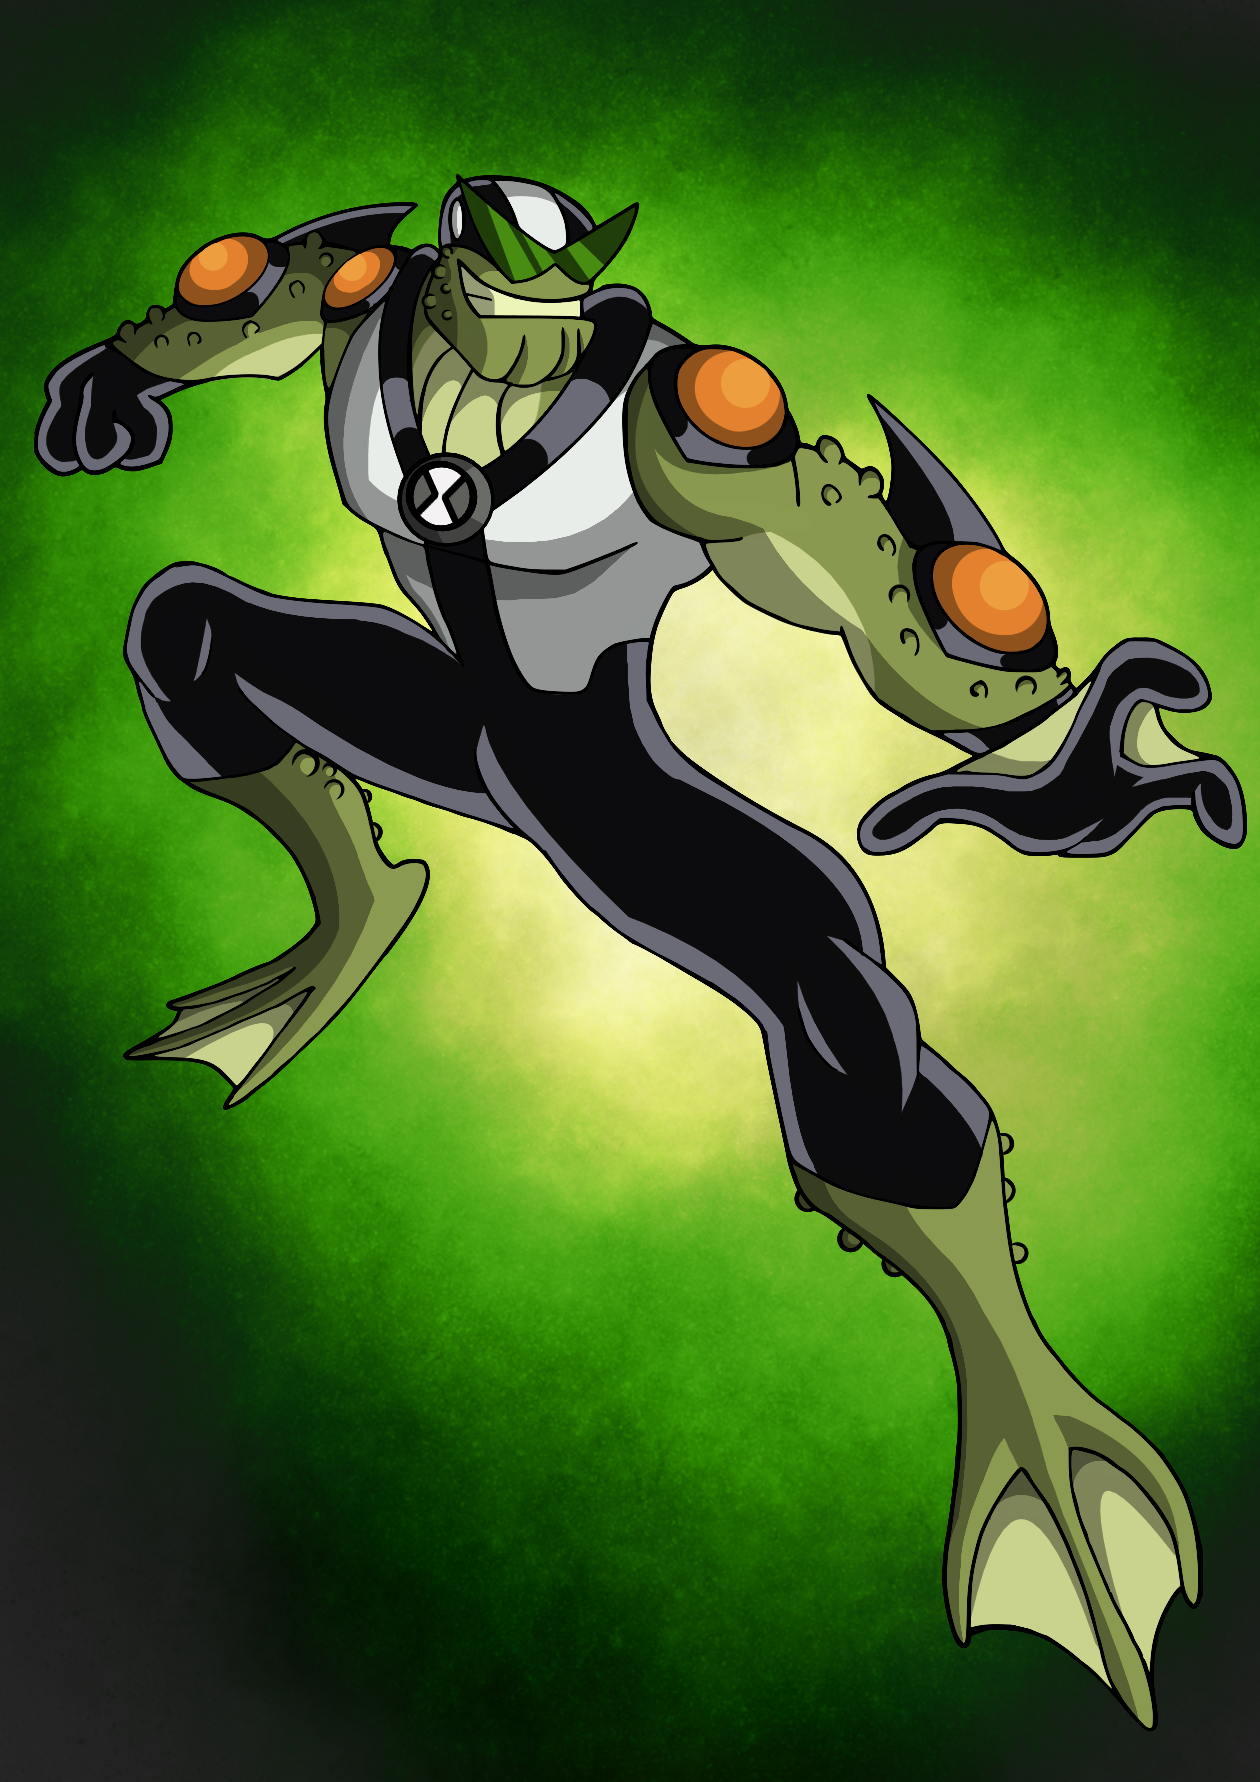 Ben 10: Into The Omniverse by TheHawkDown on DeviantArt